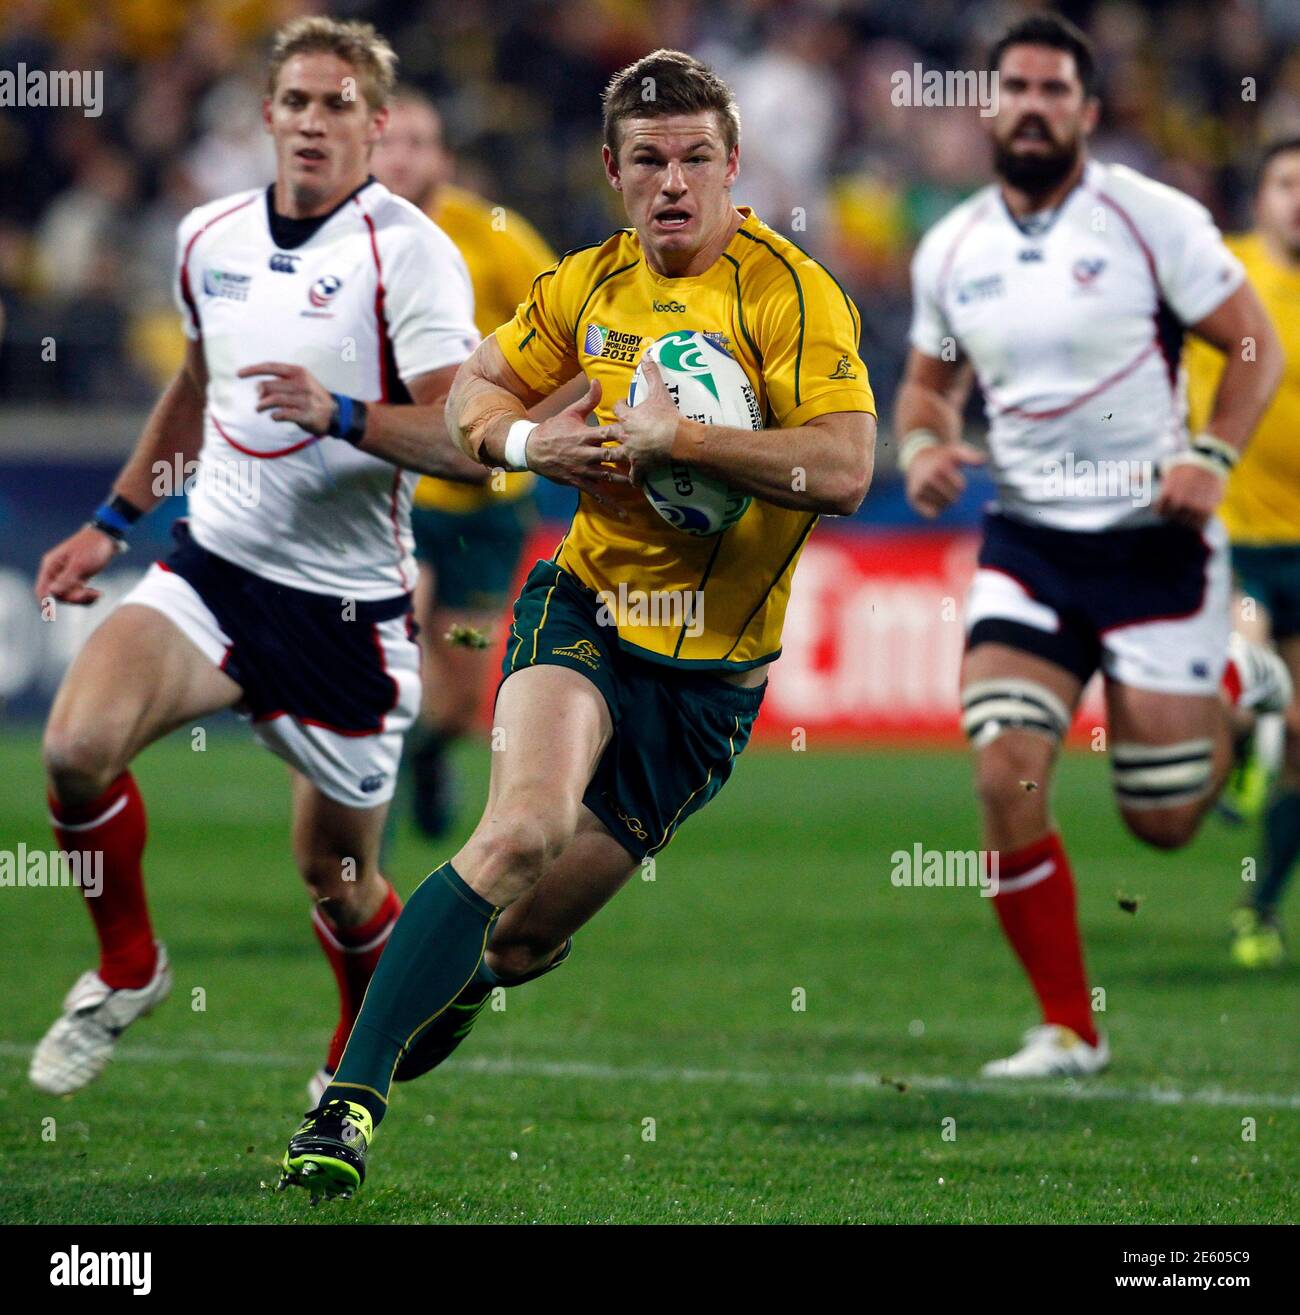 Australia Wallabies' Rob Horne runs with the ball during their Rugby World Cup Pool C match against the U.S. at Wellington Regional Stadium in Wellington September 23, 2011.  REUTERS/David Gray (NEW ZEALAND  - Tags: SPORT RUGBY) Stock Photo